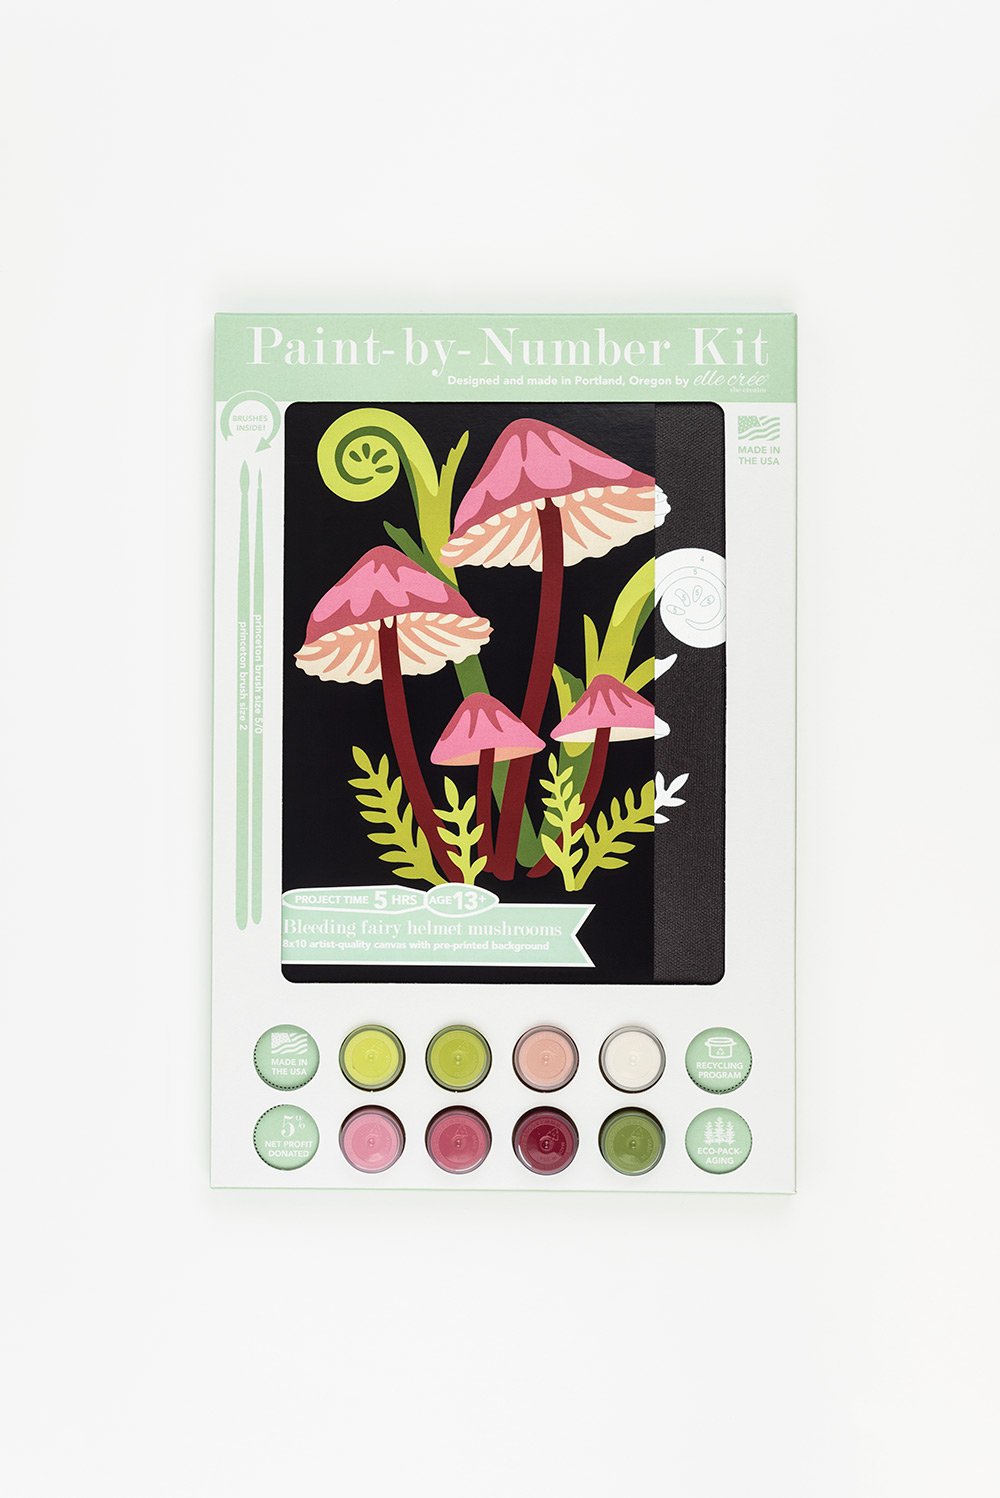 Elle Crée Paint-By-Number Kits – Olyphant Art Supply